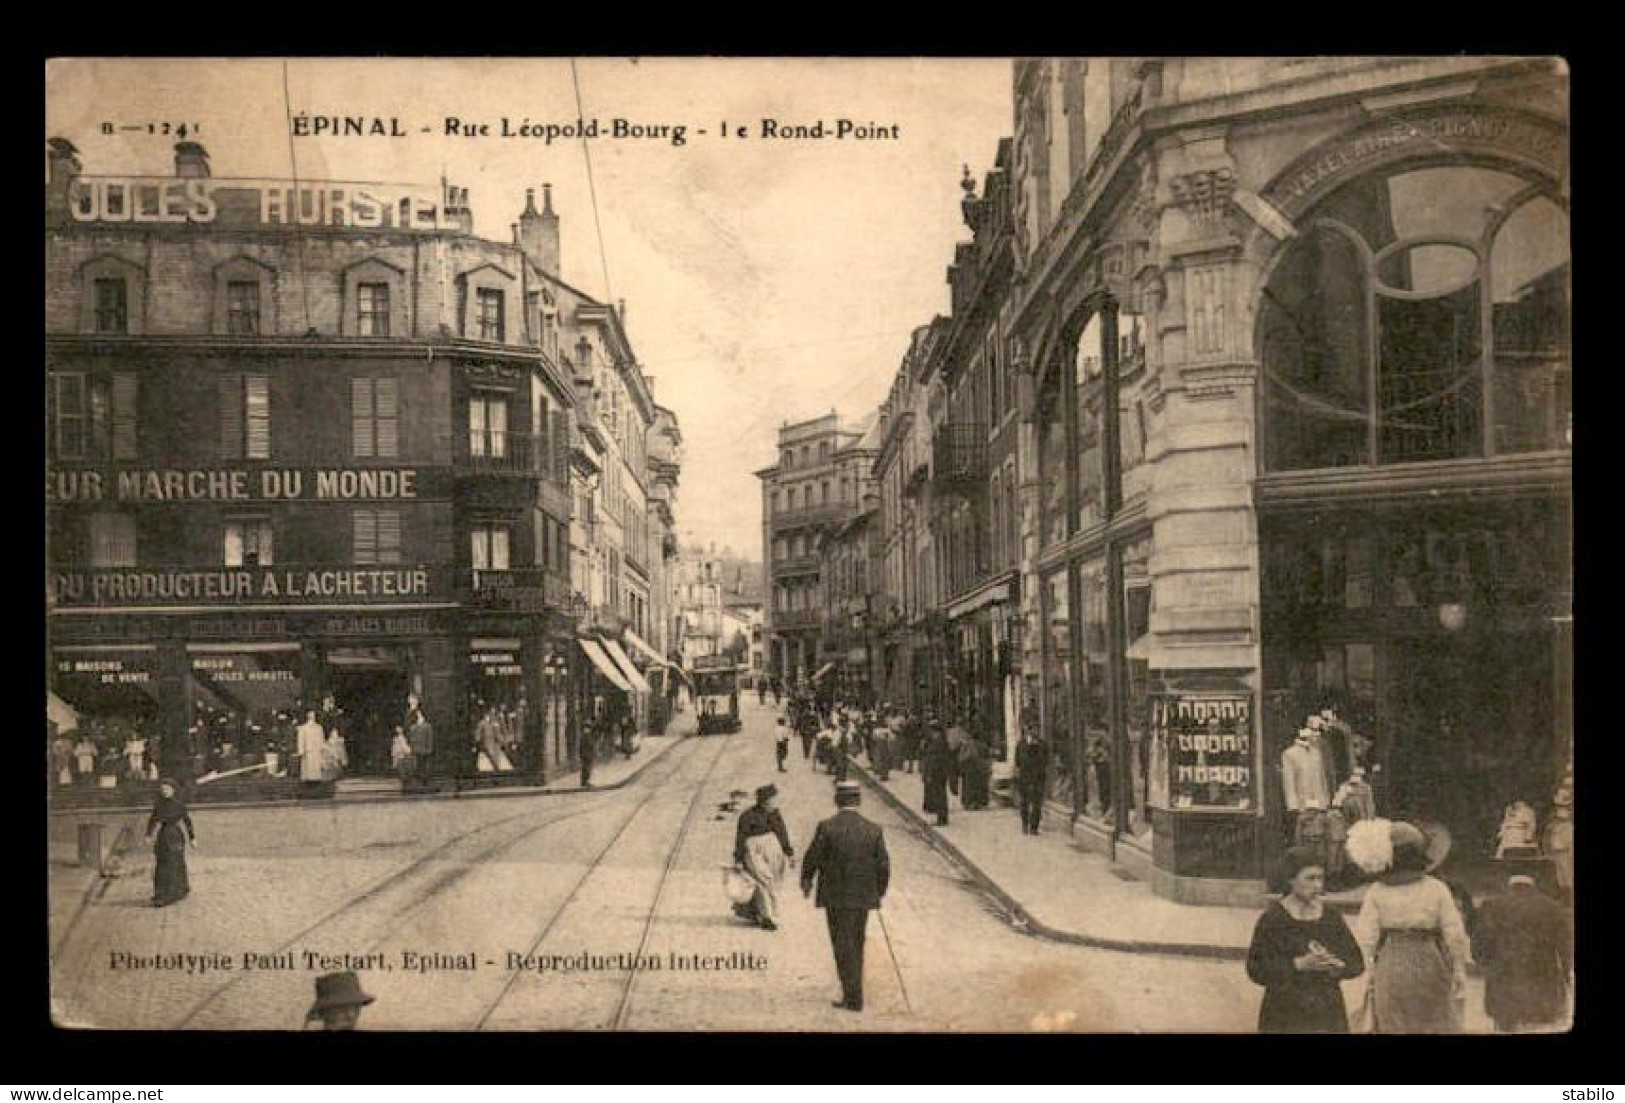 88 - EPINAL - RUE LEOPOLD BOURG - LE ROND POINT - MAGASIN JULES HURSTEL - Epinal